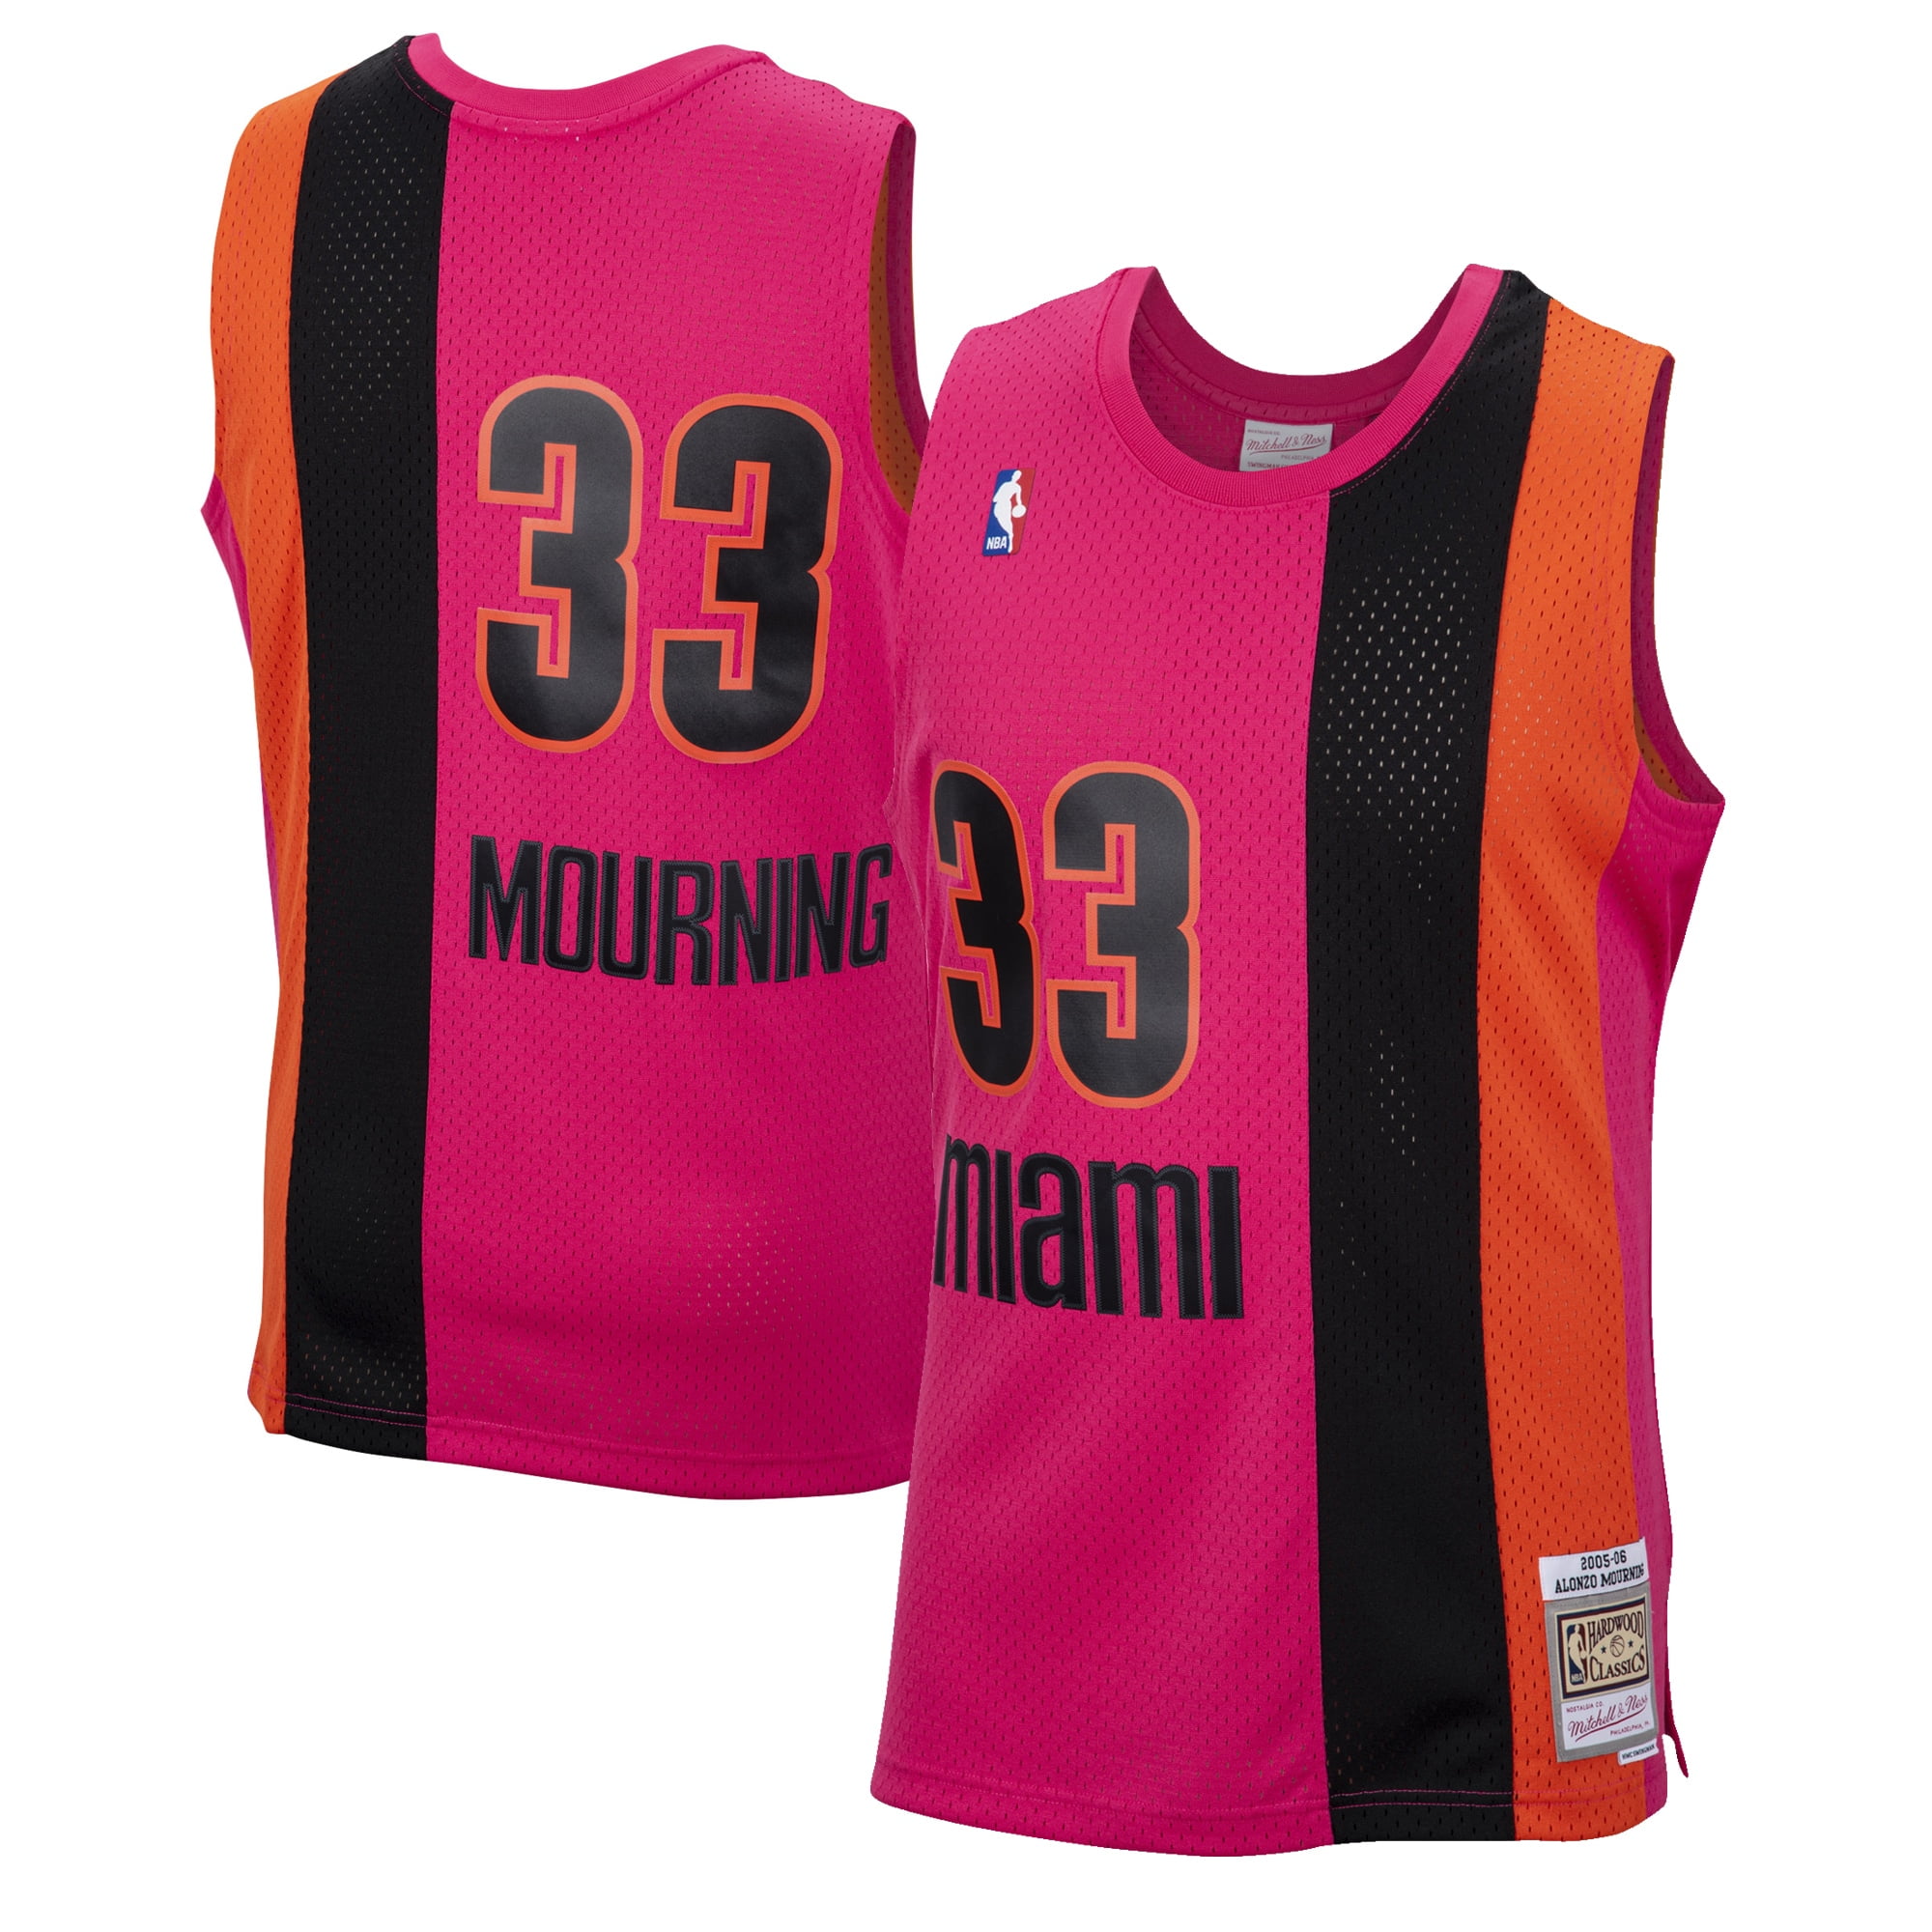 mourning jersey